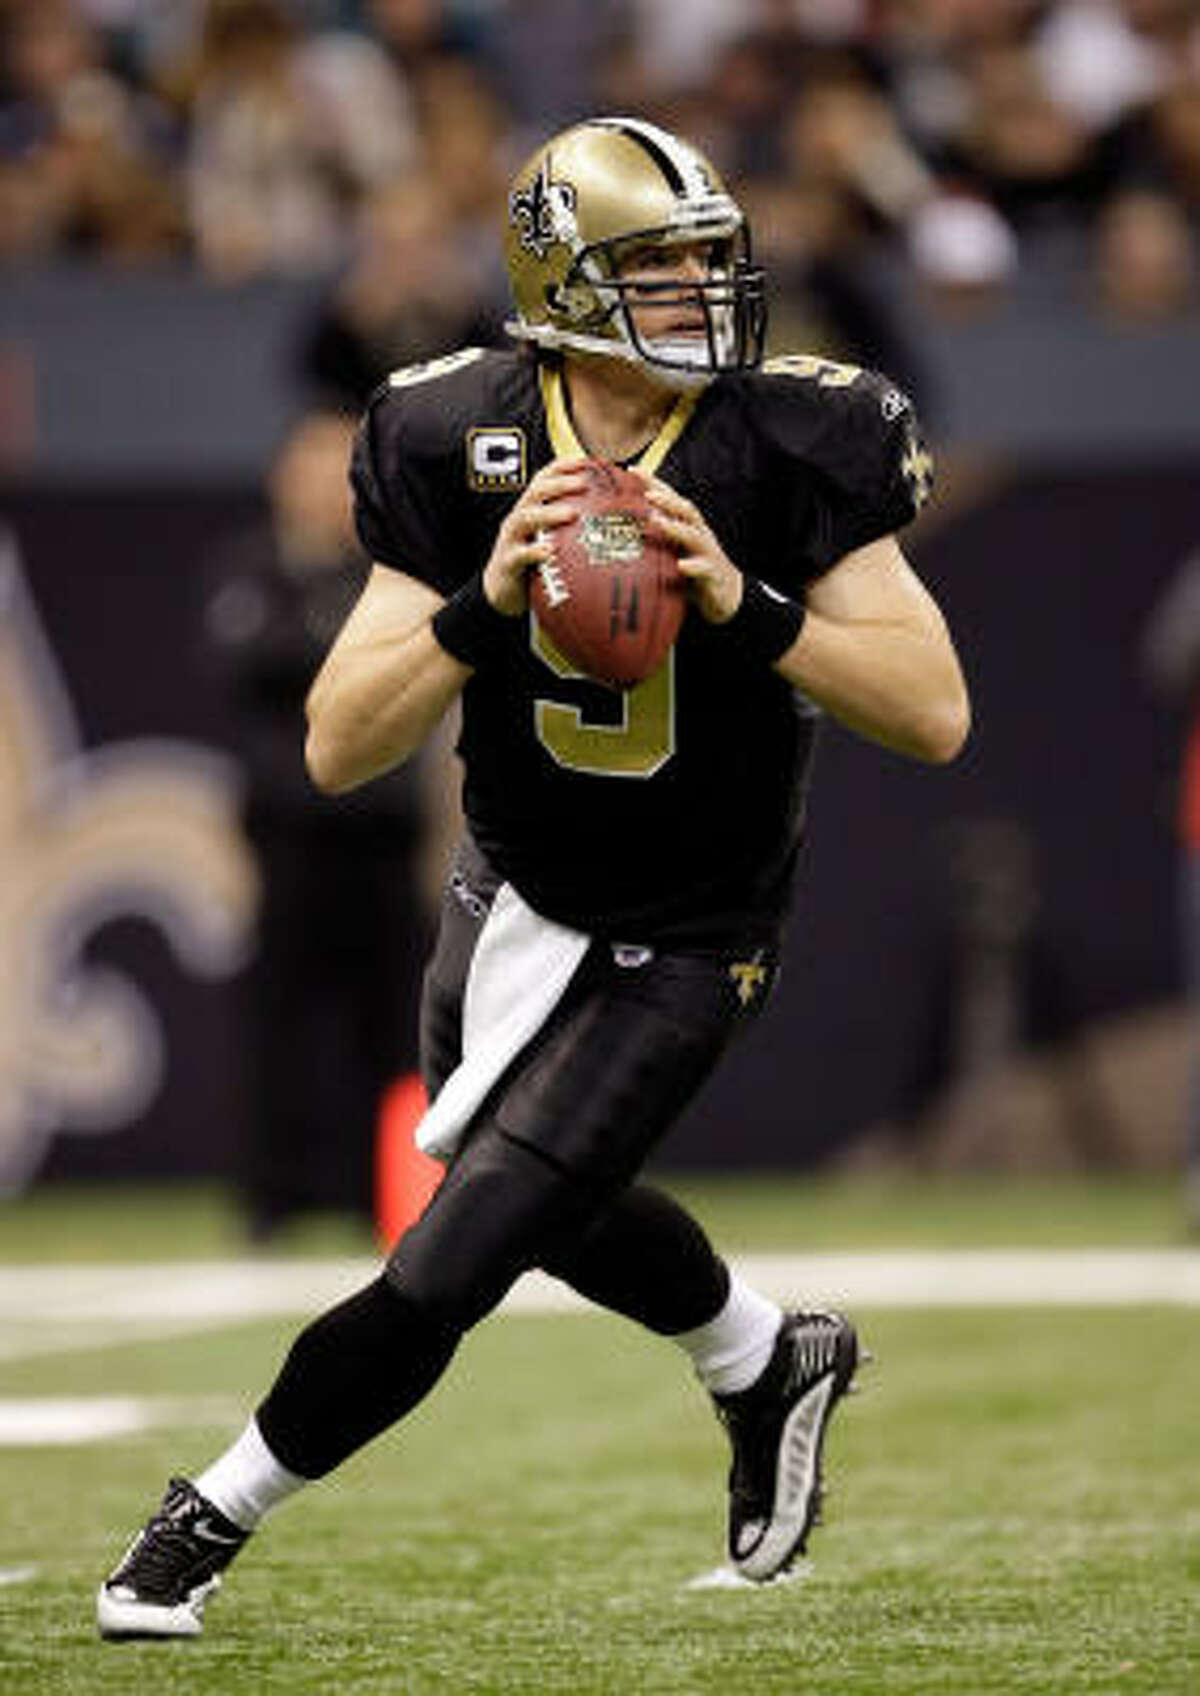 New Orleans Saints Needs: Despite winning it all, there are some holes. Better pass rush; speed at OLB; power RB. Strengths: Everywhere on offense, especially at QB with Drew Brees (top photo) and at skill positions; safety; MLB Jonathan Vilma; special teams.